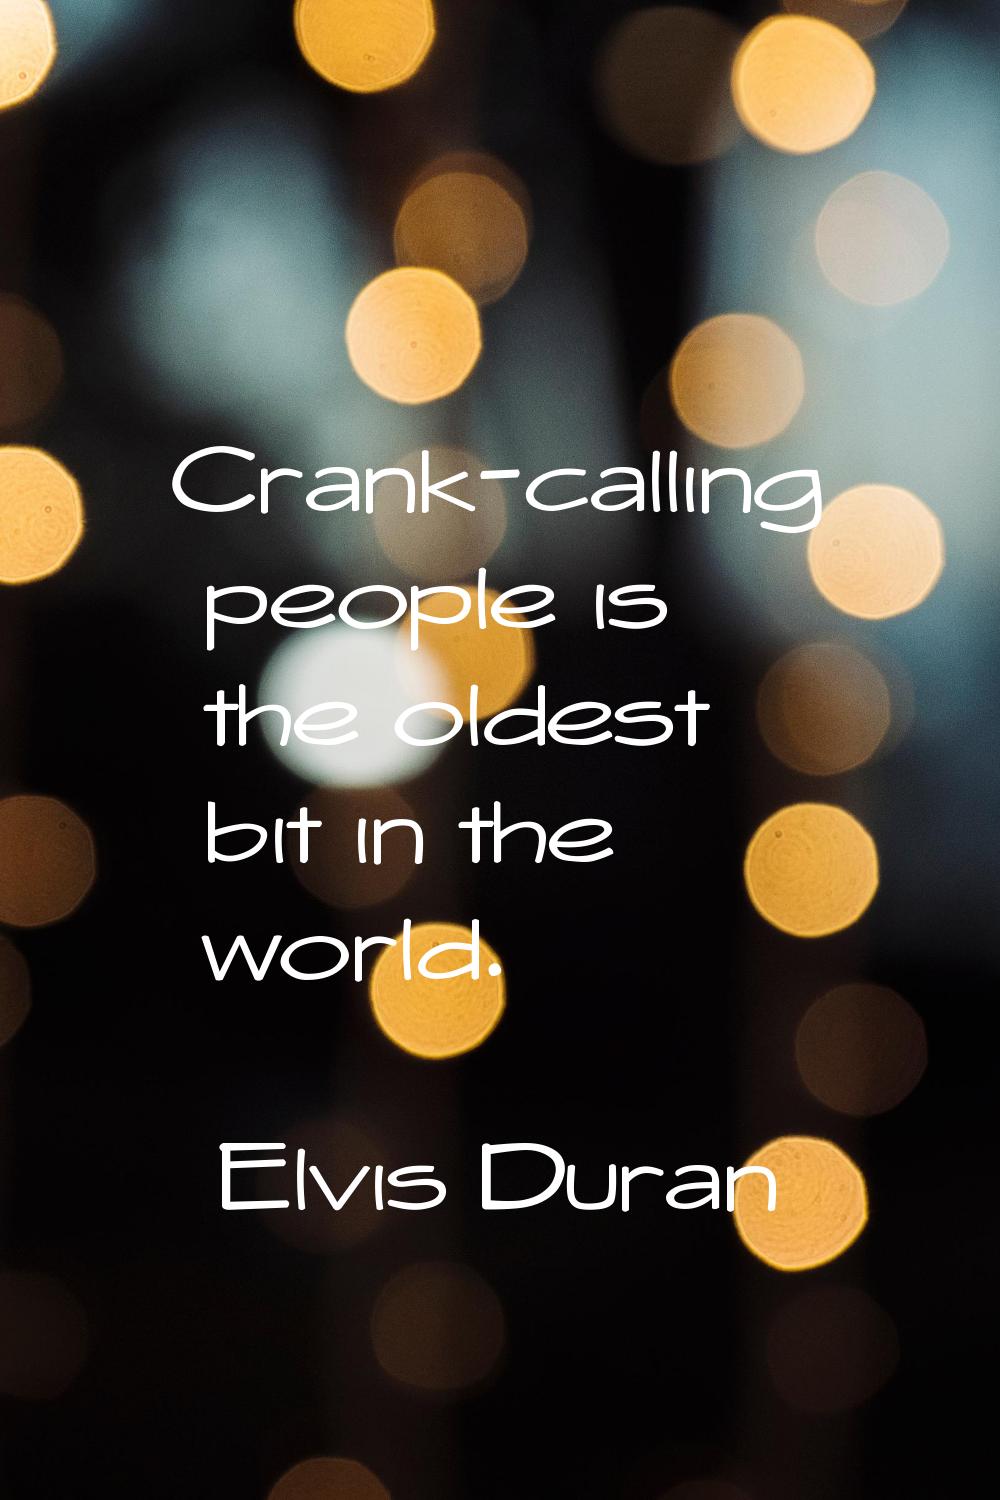 Crank-calling people is the oldest bit in the world.